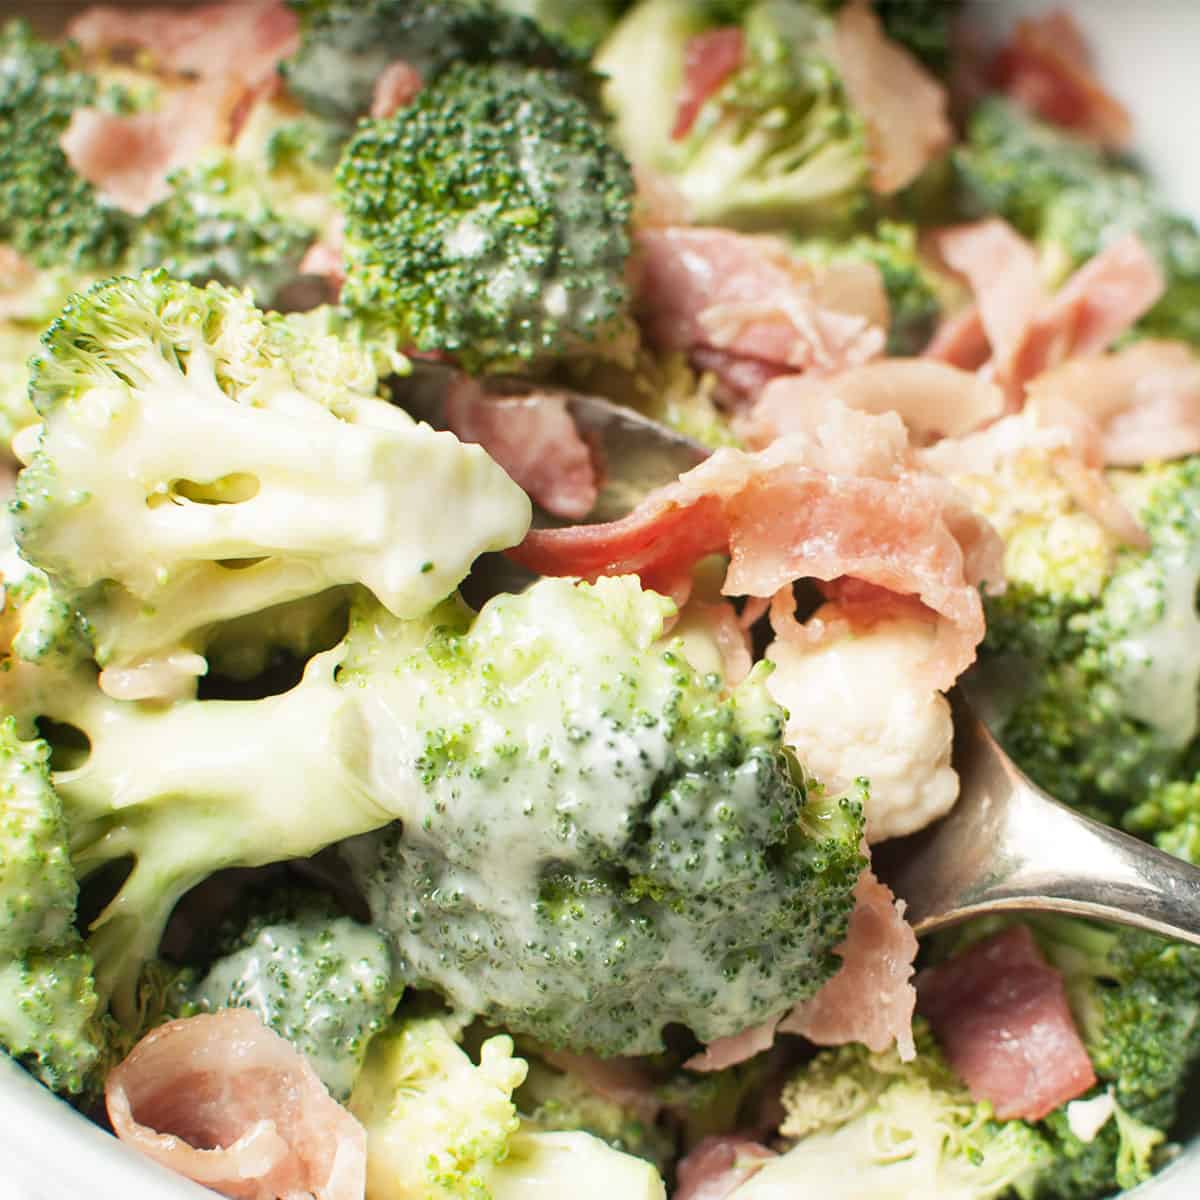 A spoon scooping Amish Broccoli and Cauliflower Salad.